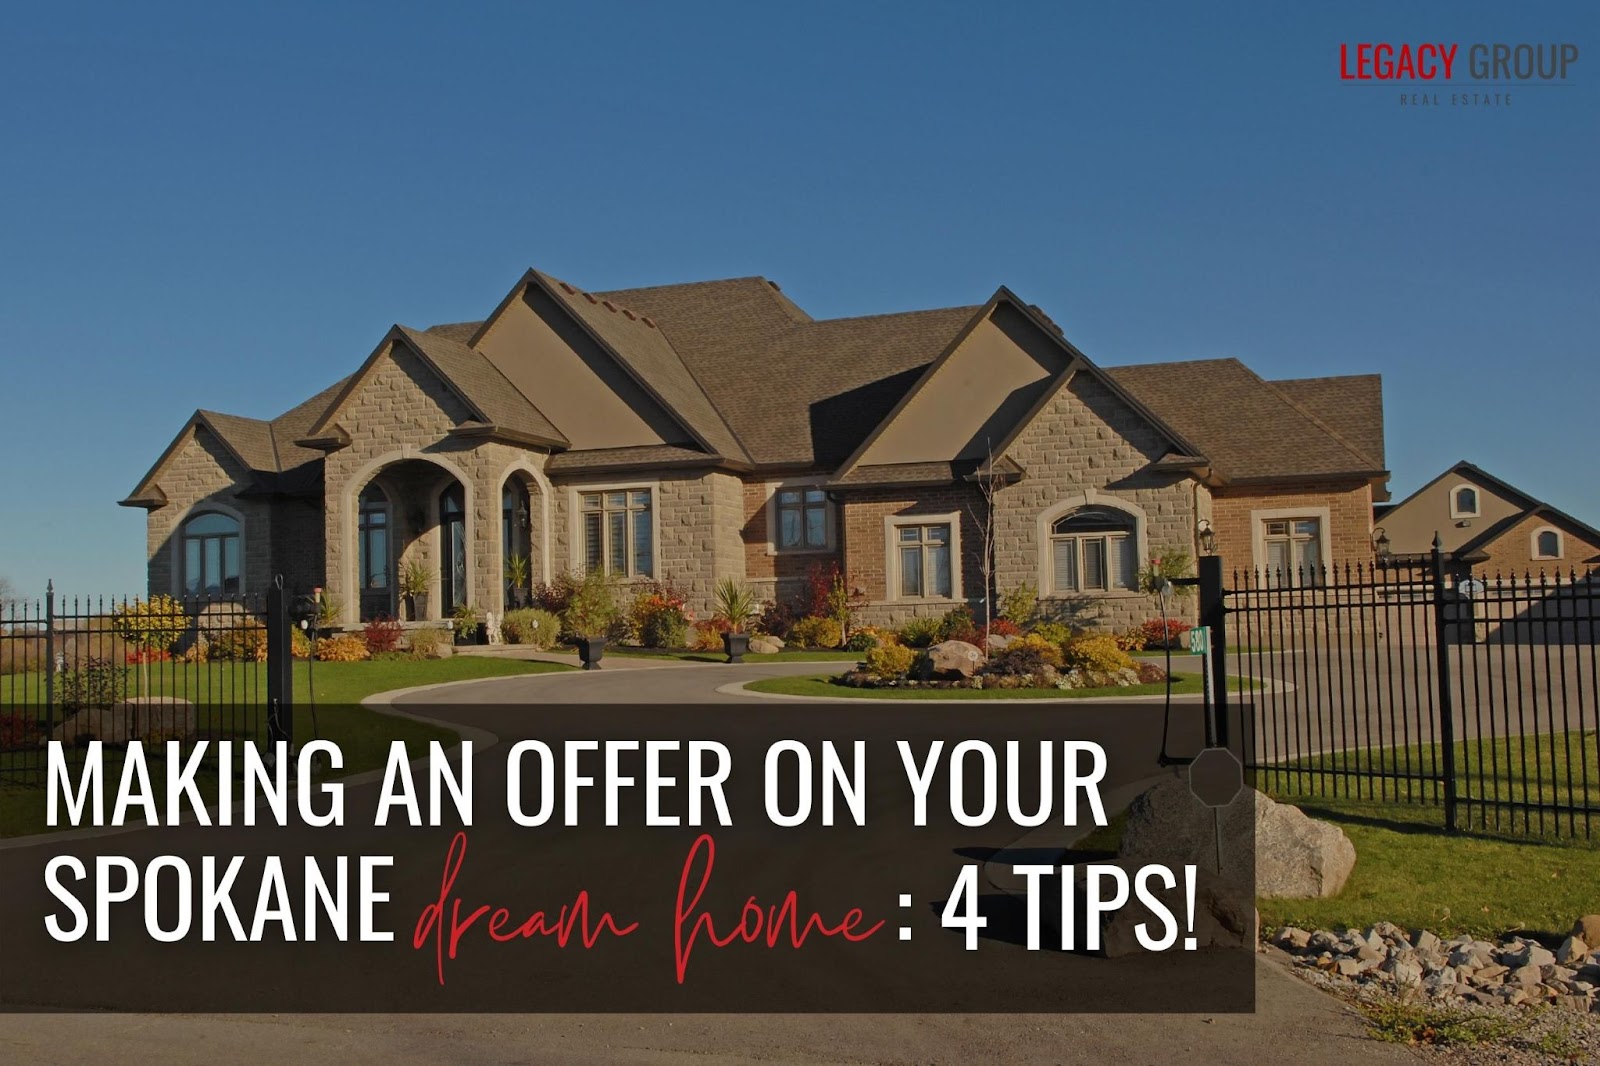 Making an Offer on Your Spokane Dream Home: 4 Tips